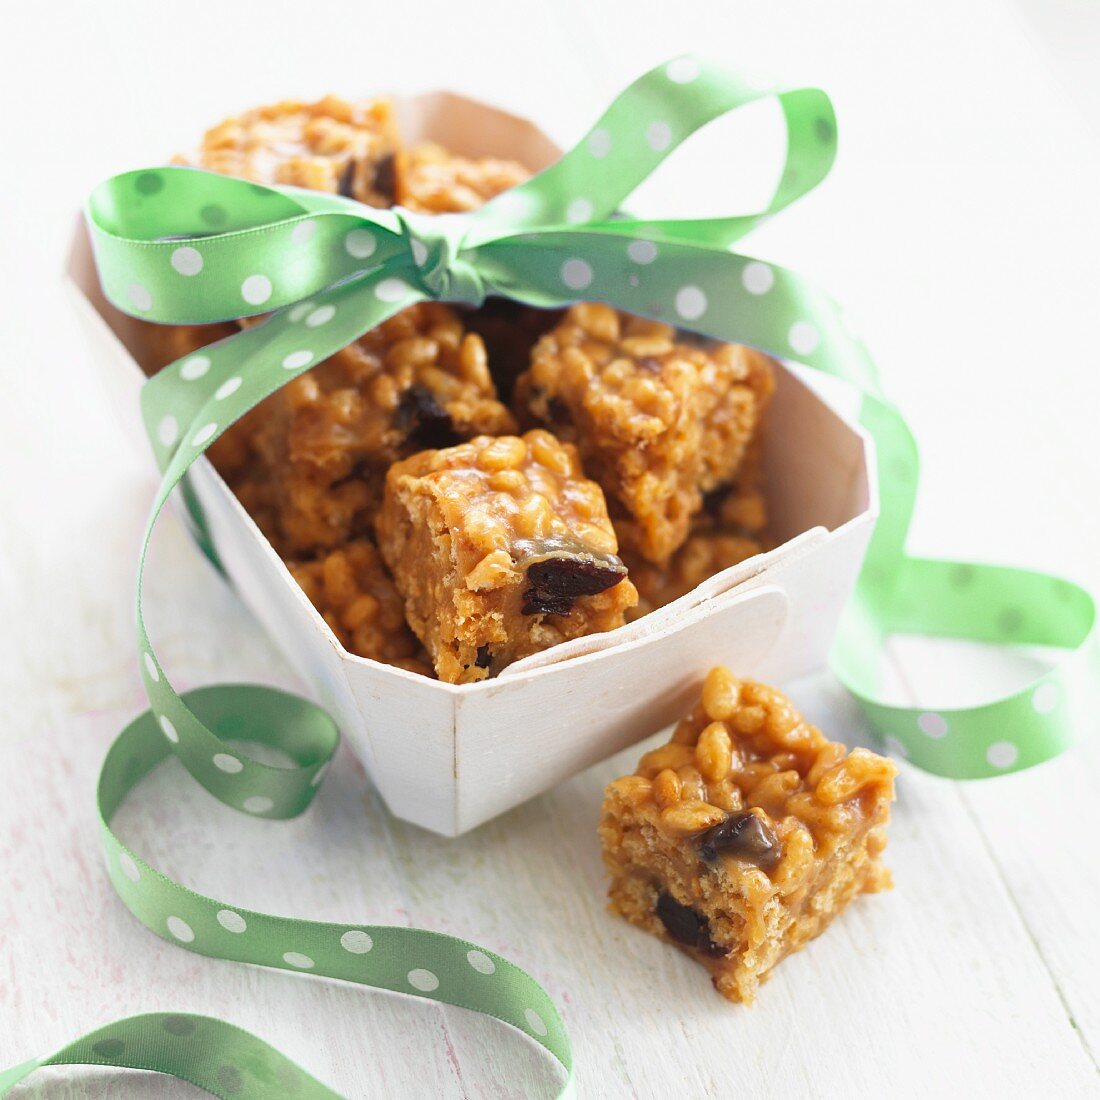 Toffee-rice bars for gifting